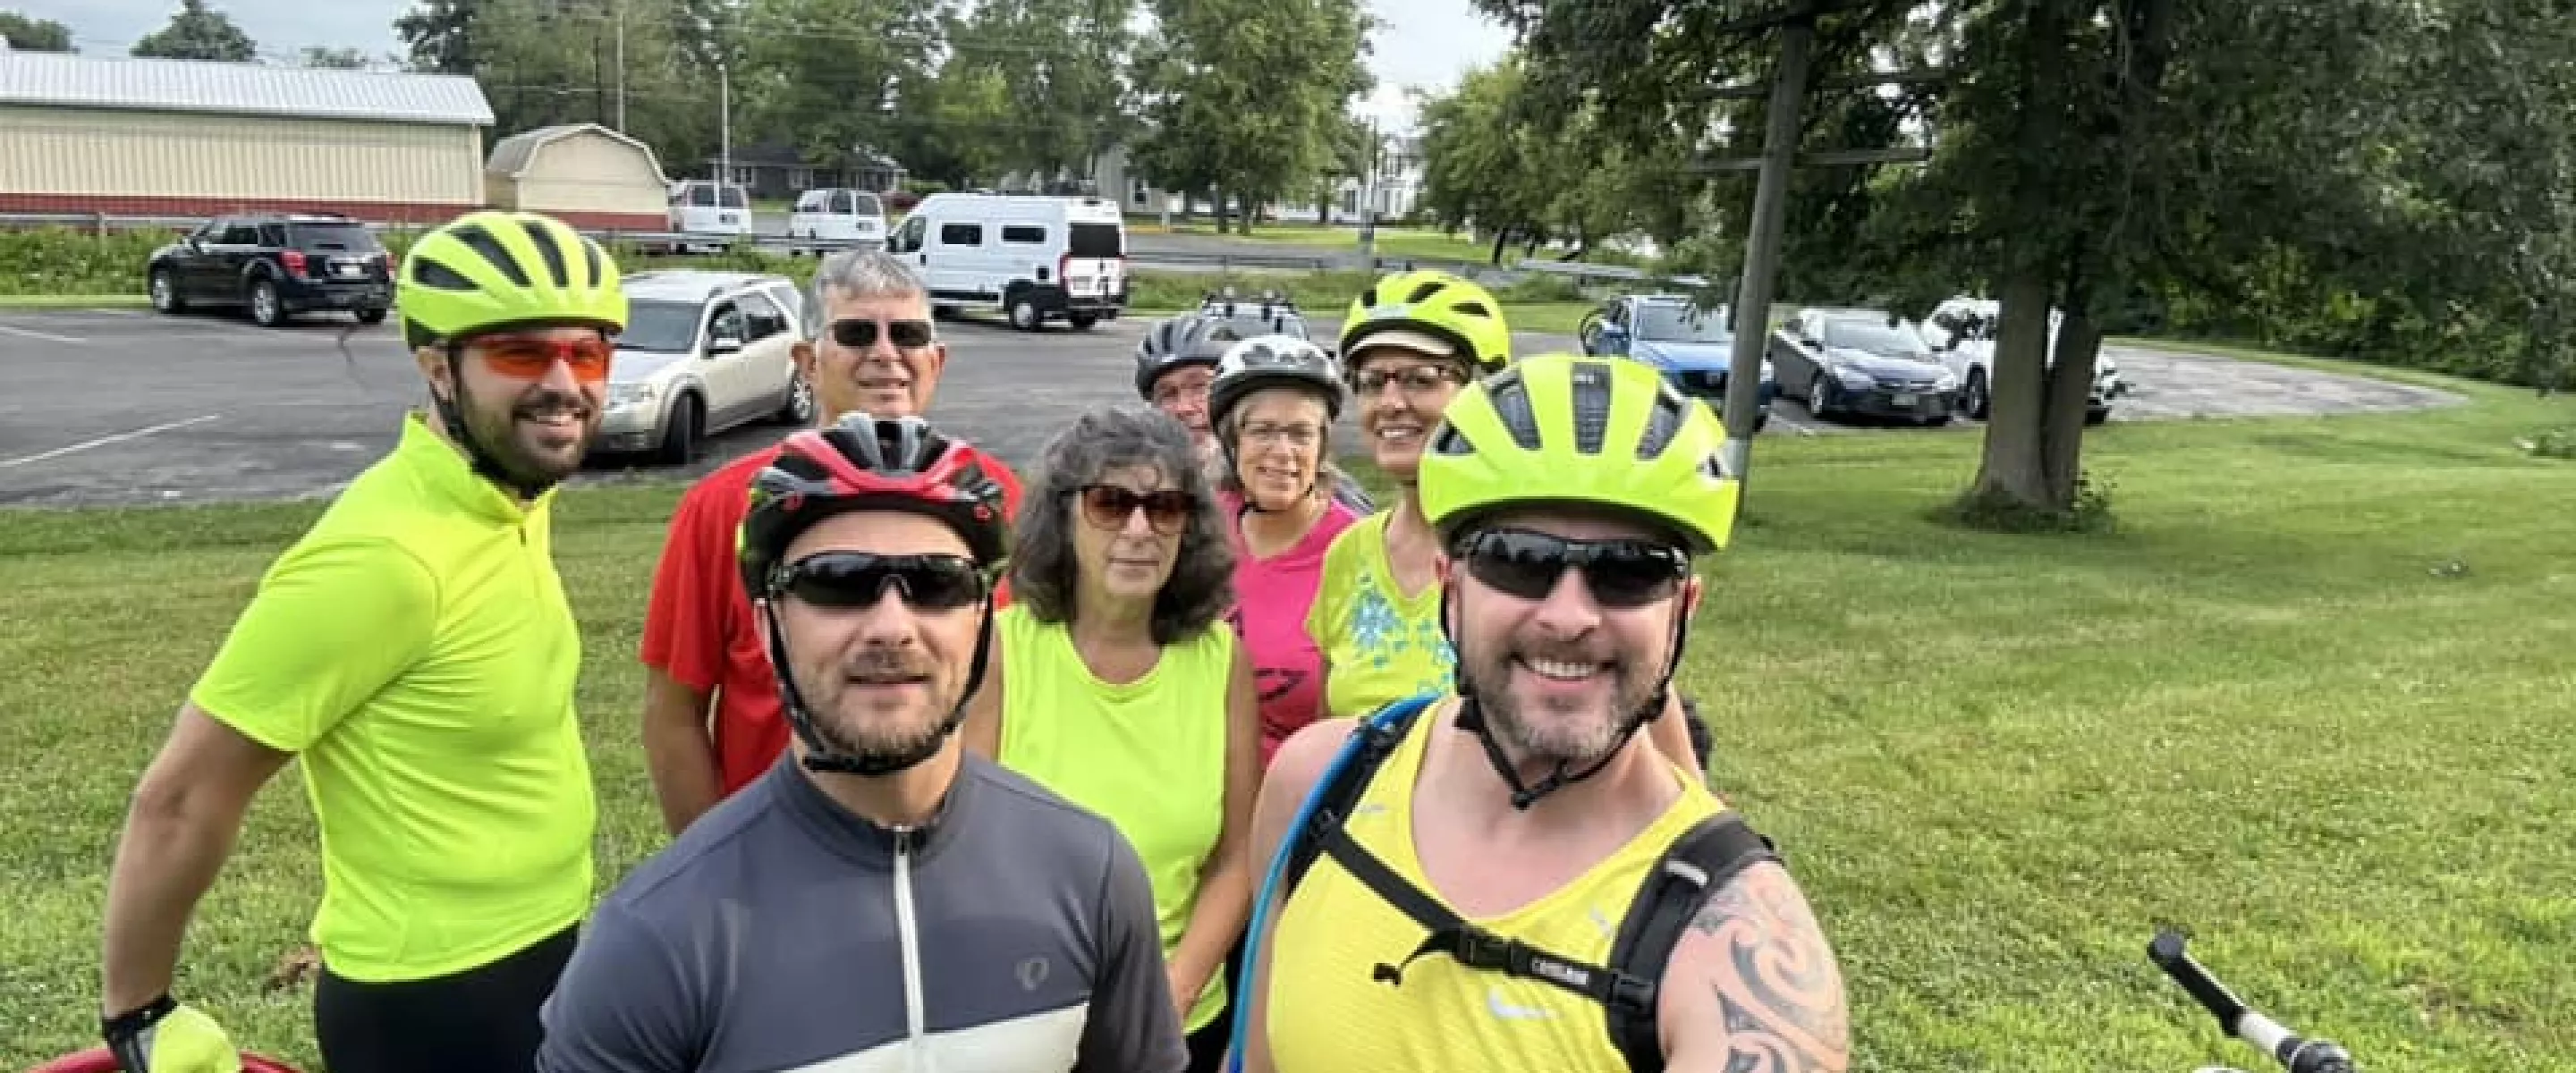 group of bicycle riders smile at camera